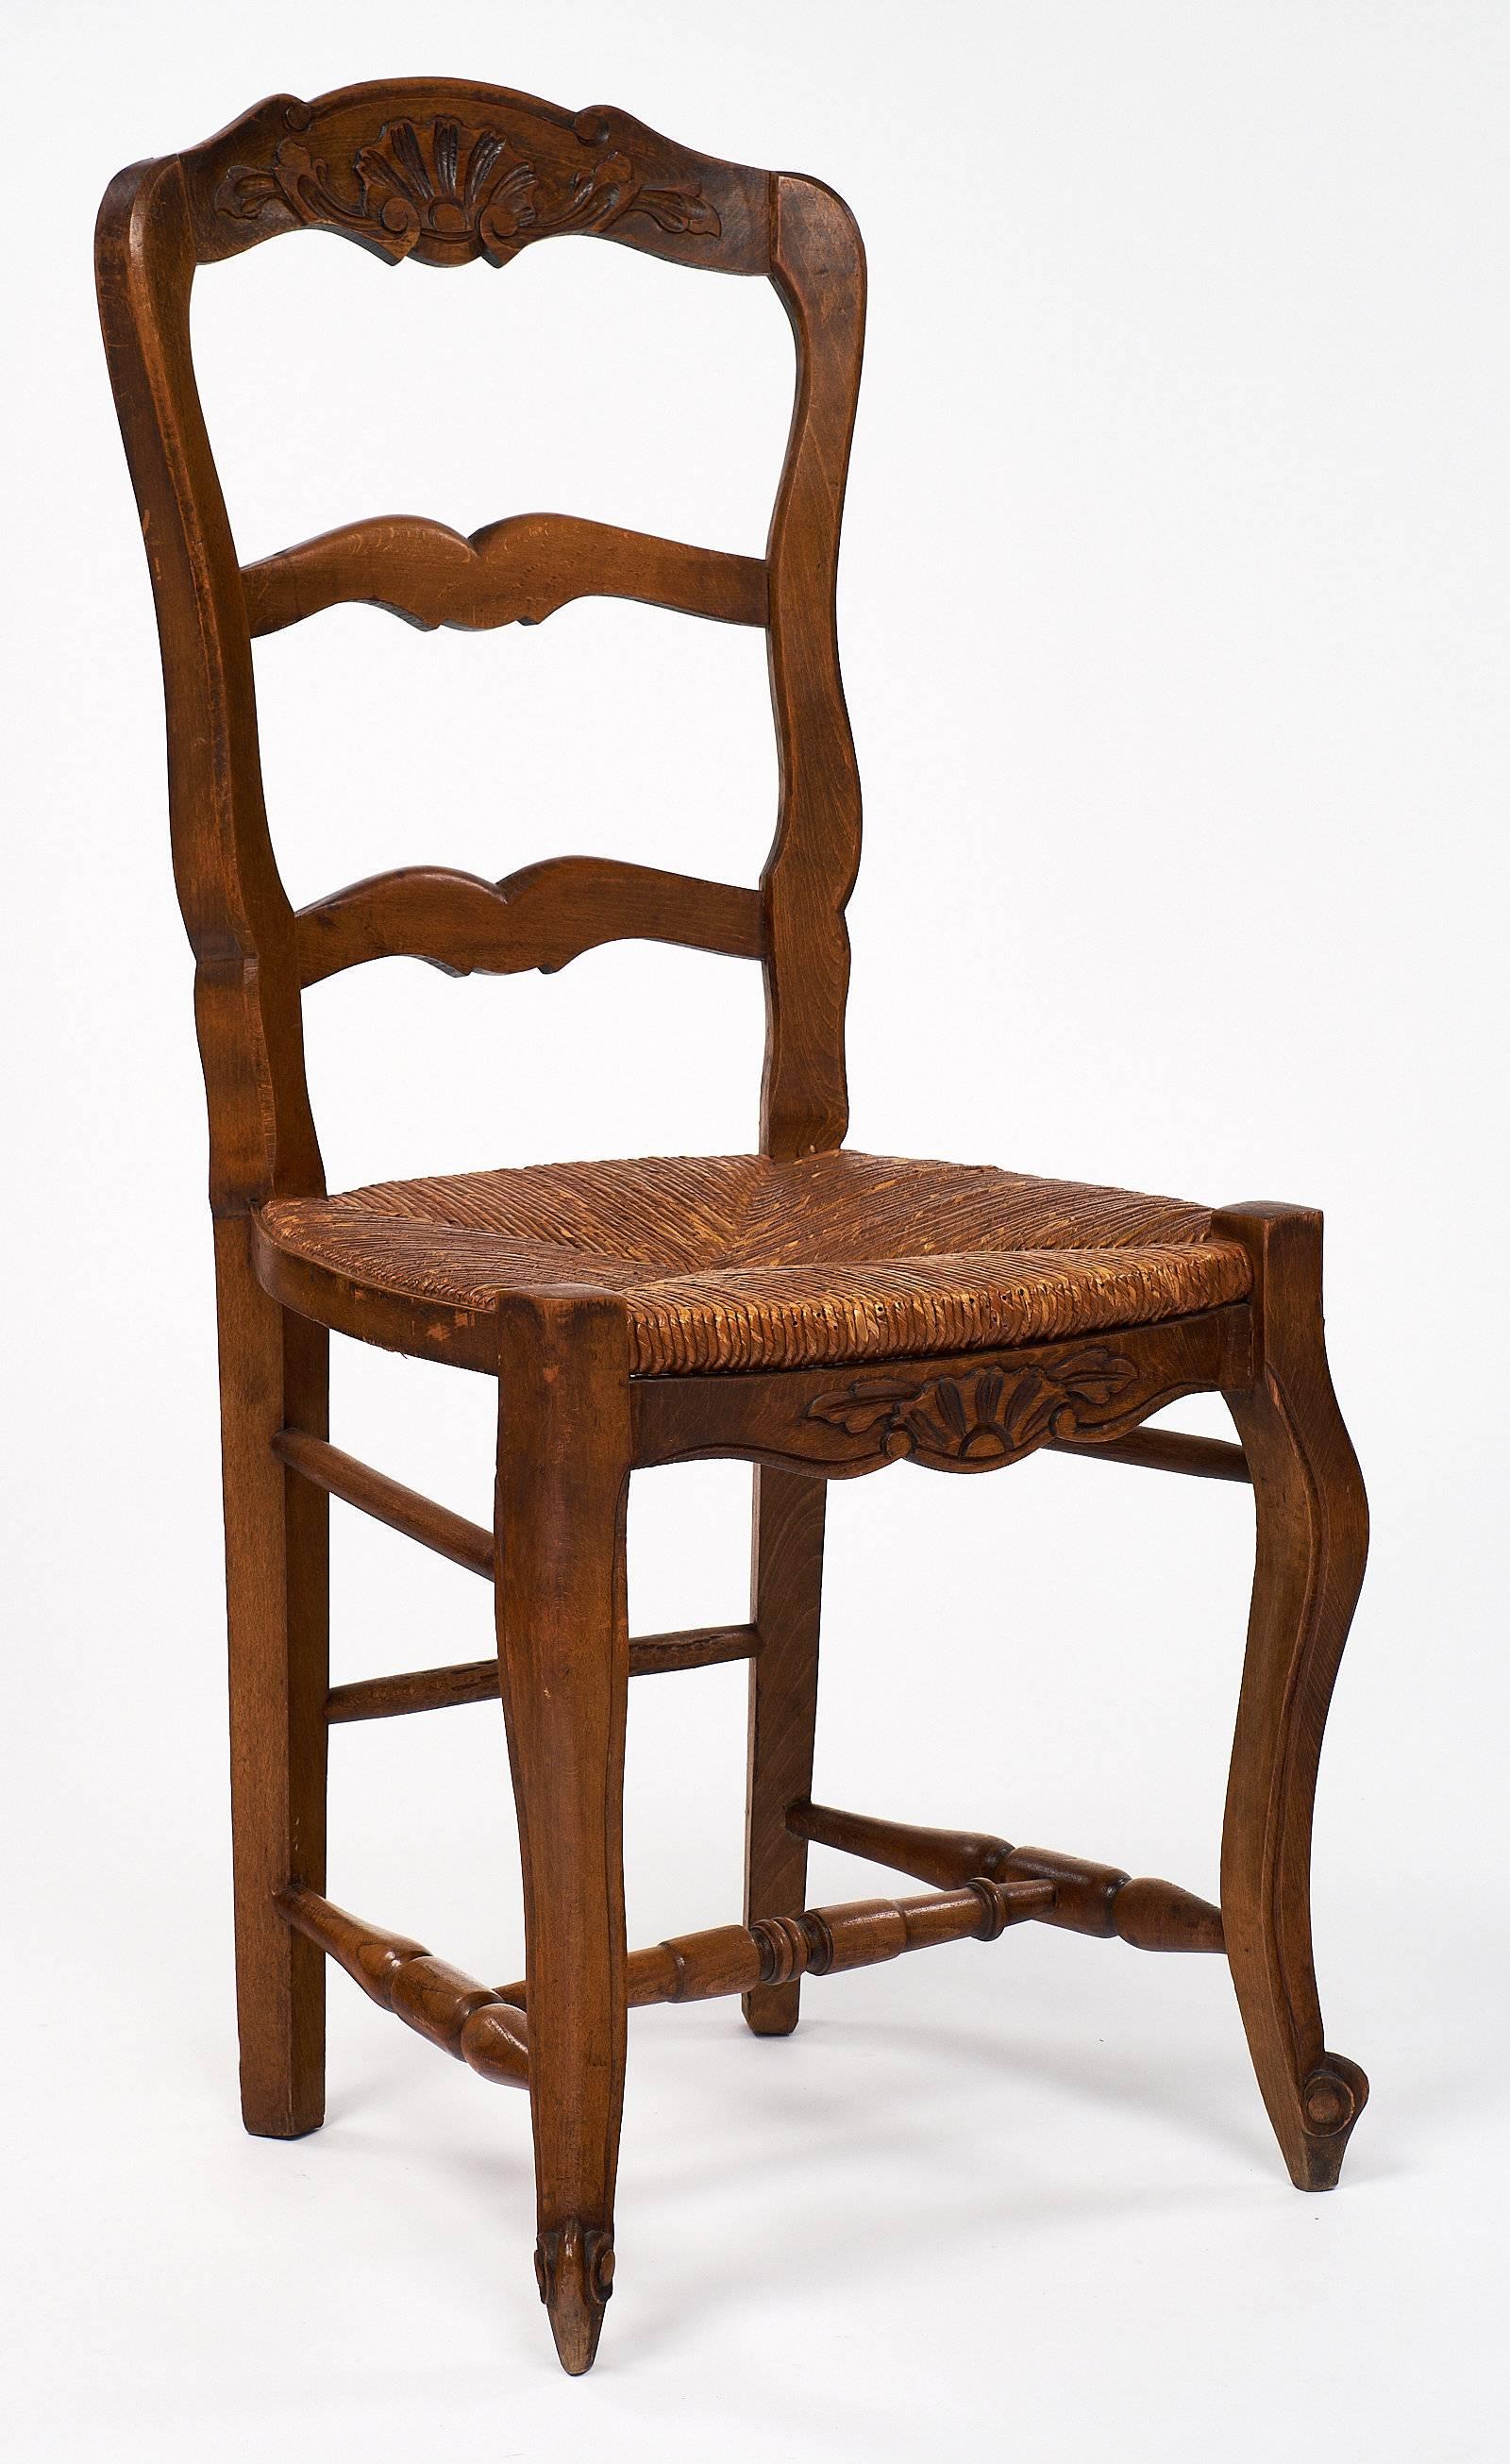 antique wooden chairs with wicker seats